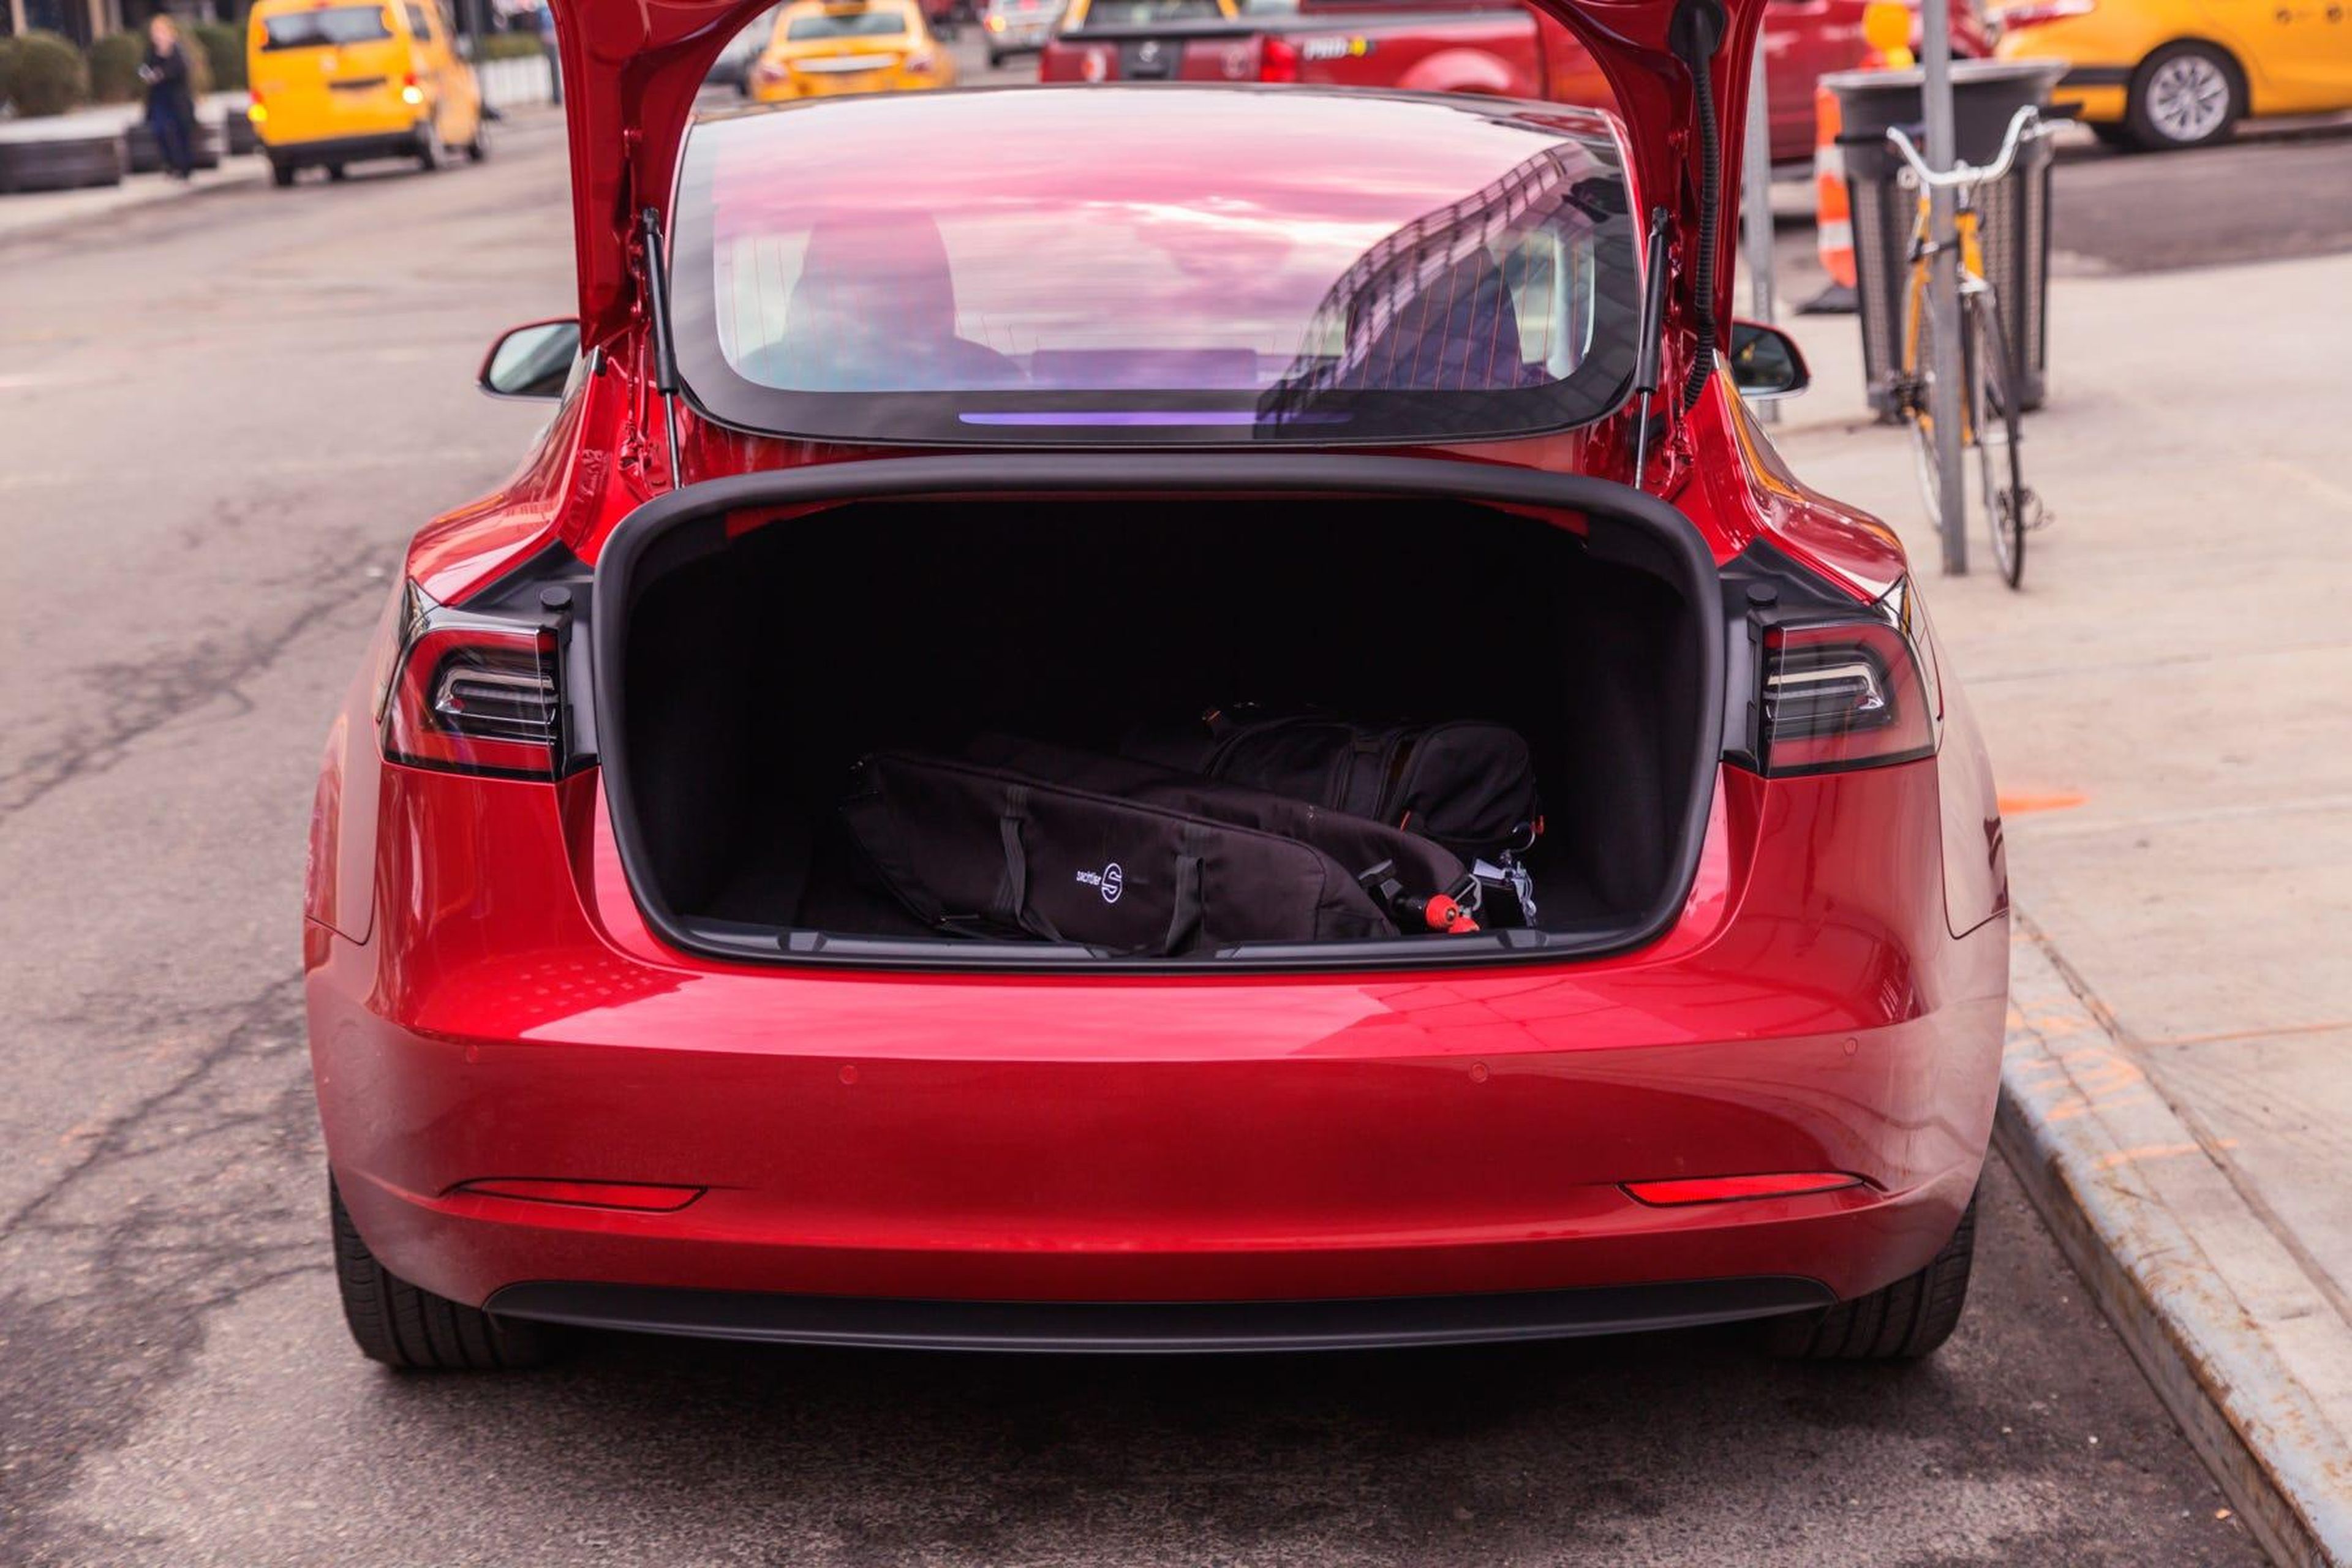 The Model 3 offers much less cargo space than the Model S — just 15 cubic feet between the trunk and frunk. But that's still plenty for everything but full-family road trips over long weekends.